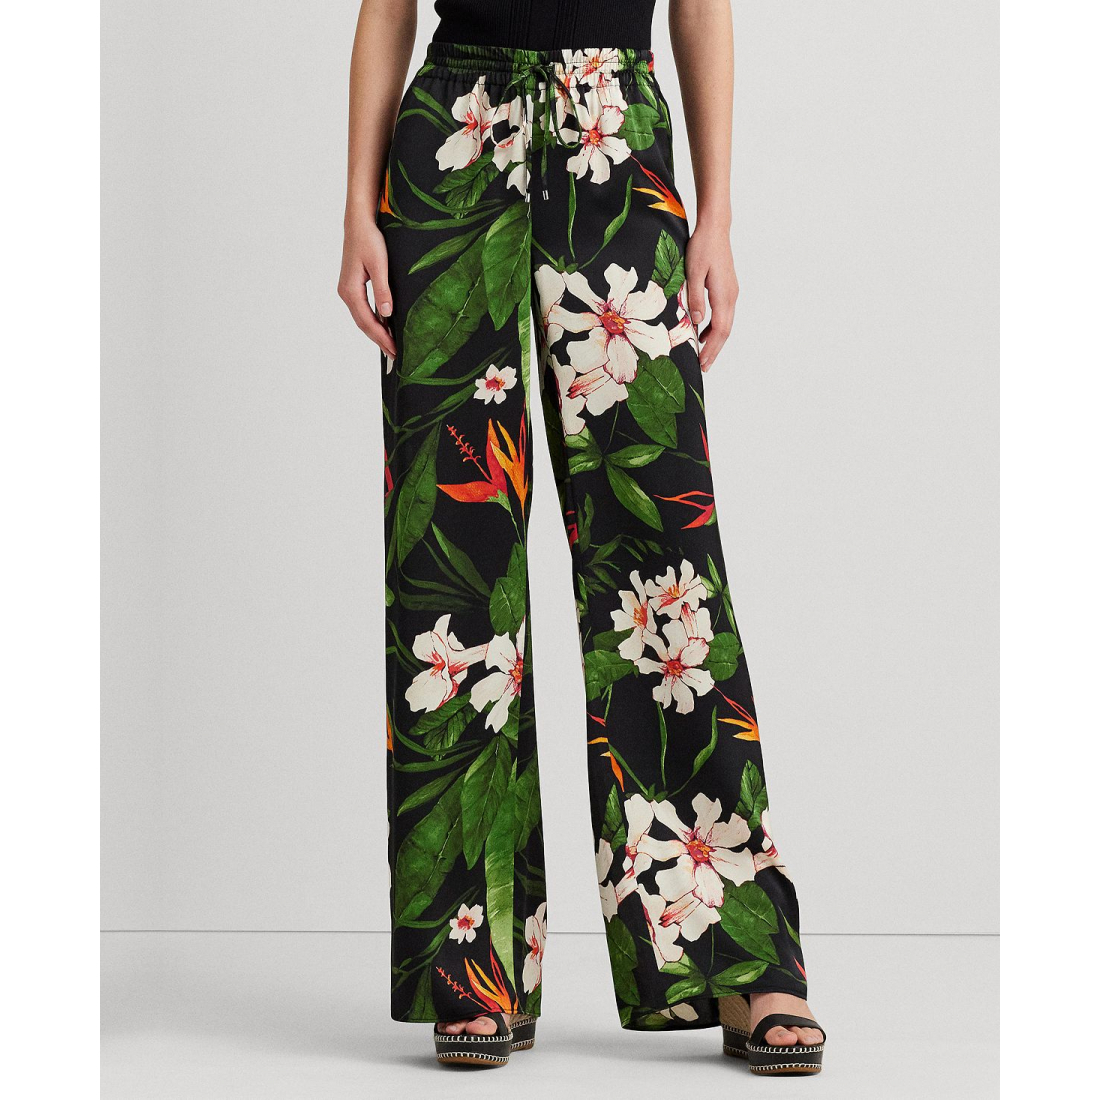 Women's 'Floral Charmeuse' Trousers